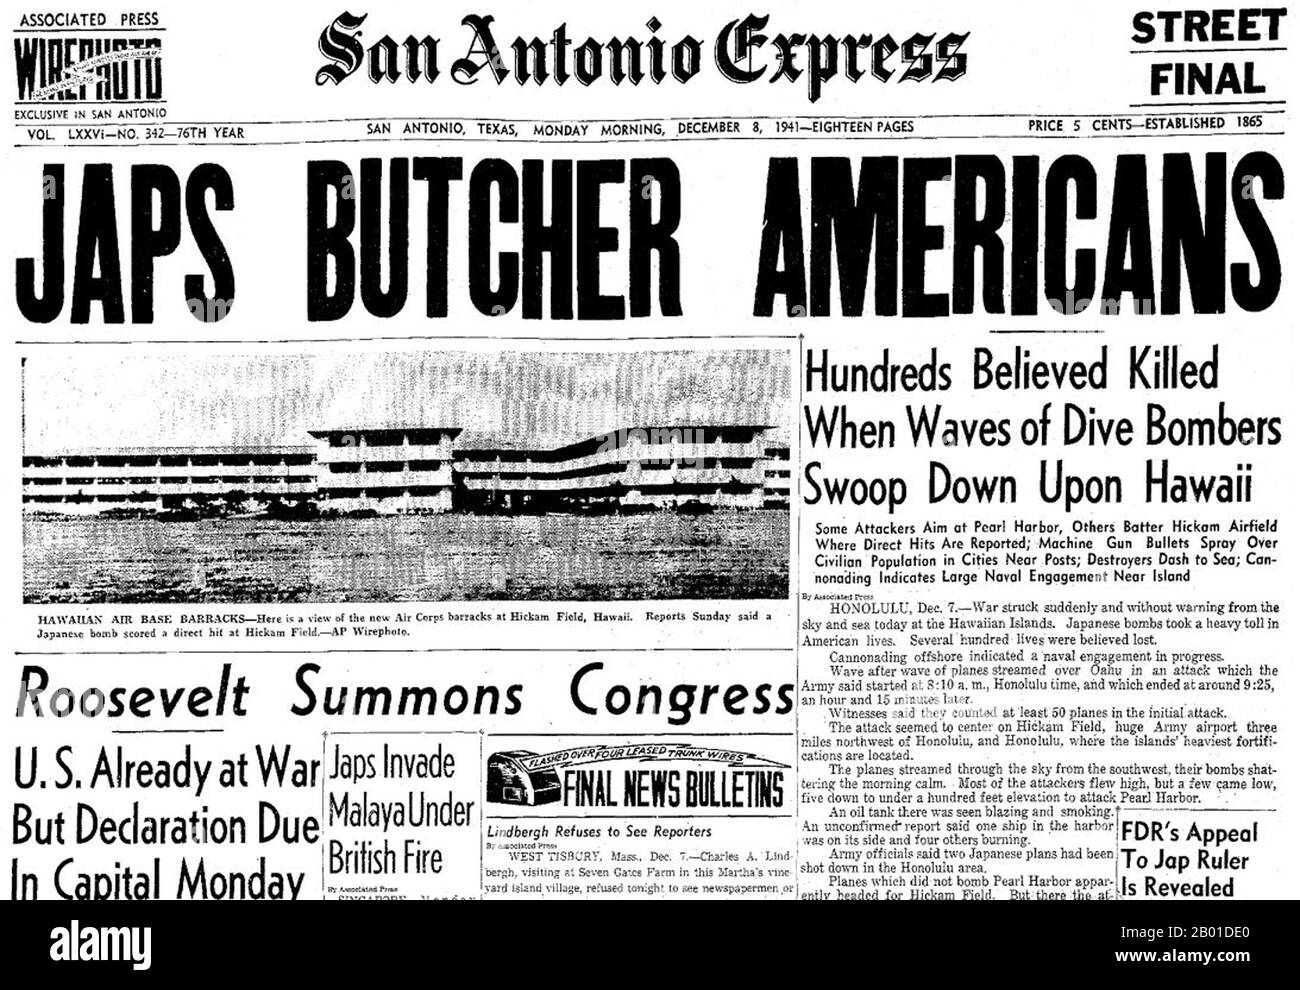 USA/Japan: Headline of the San Antonio Express (Texas) on 8 December, 1941, the day after the Japanese attack on Pearl Harbour.  The attack on Pearl Harbor was a surprise military strike conducted by the Imperial Japanese Navy against the United States naval base at Pearl Harbor, Hawaii, on the morning of December 7, 1941 (December 8 in Japan).  The attack was intended as a preventive action in order to keep the U.S. Pacific Fleet from interfering with military actions the Empire of Japan was planning in Southeast Asia. Stock Photo